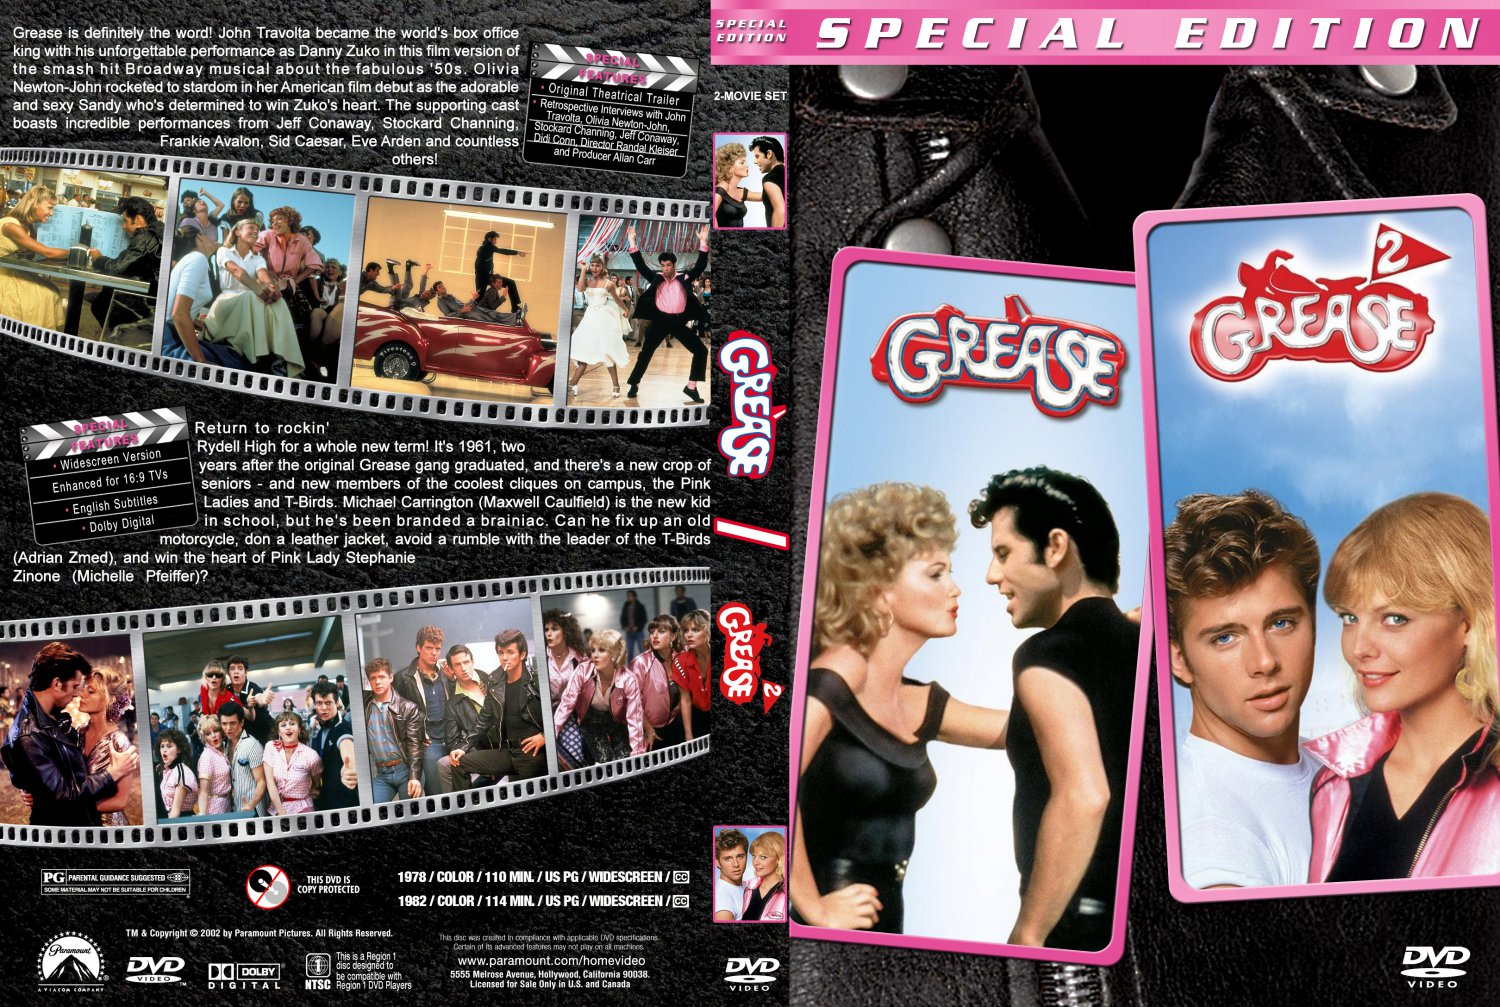 Grease / Grease 2 Double